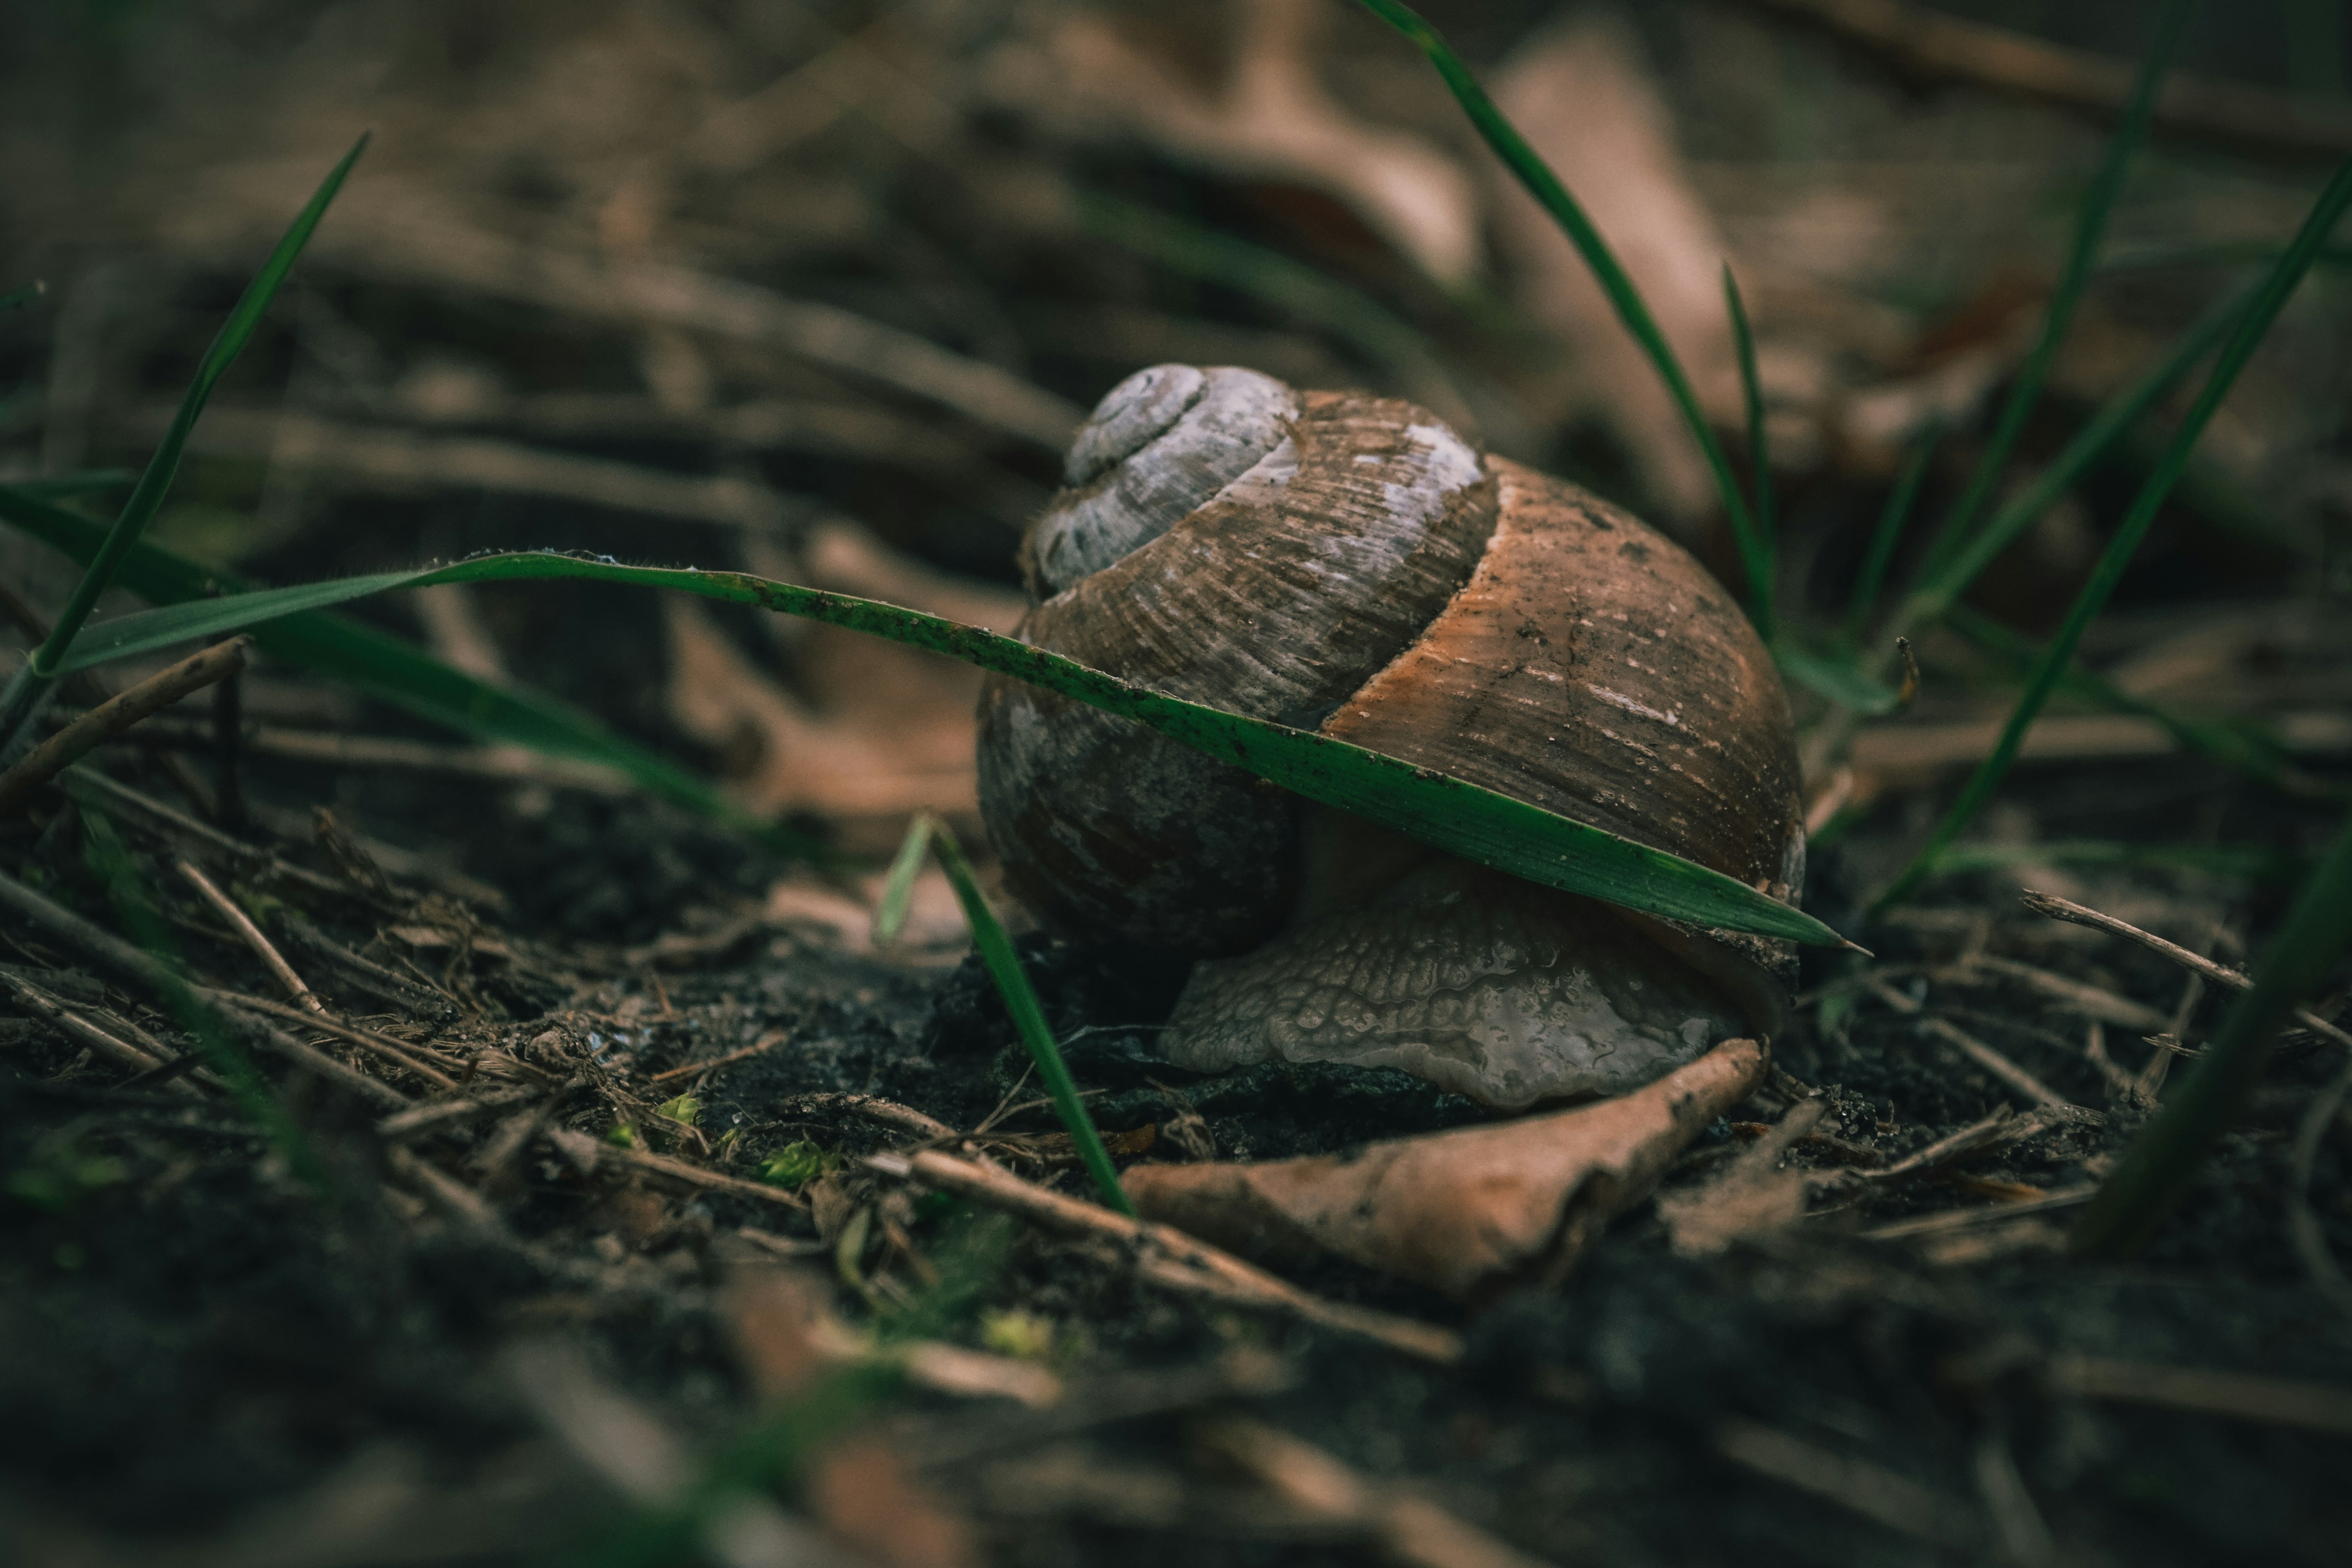 snail on ground surrounded by grass